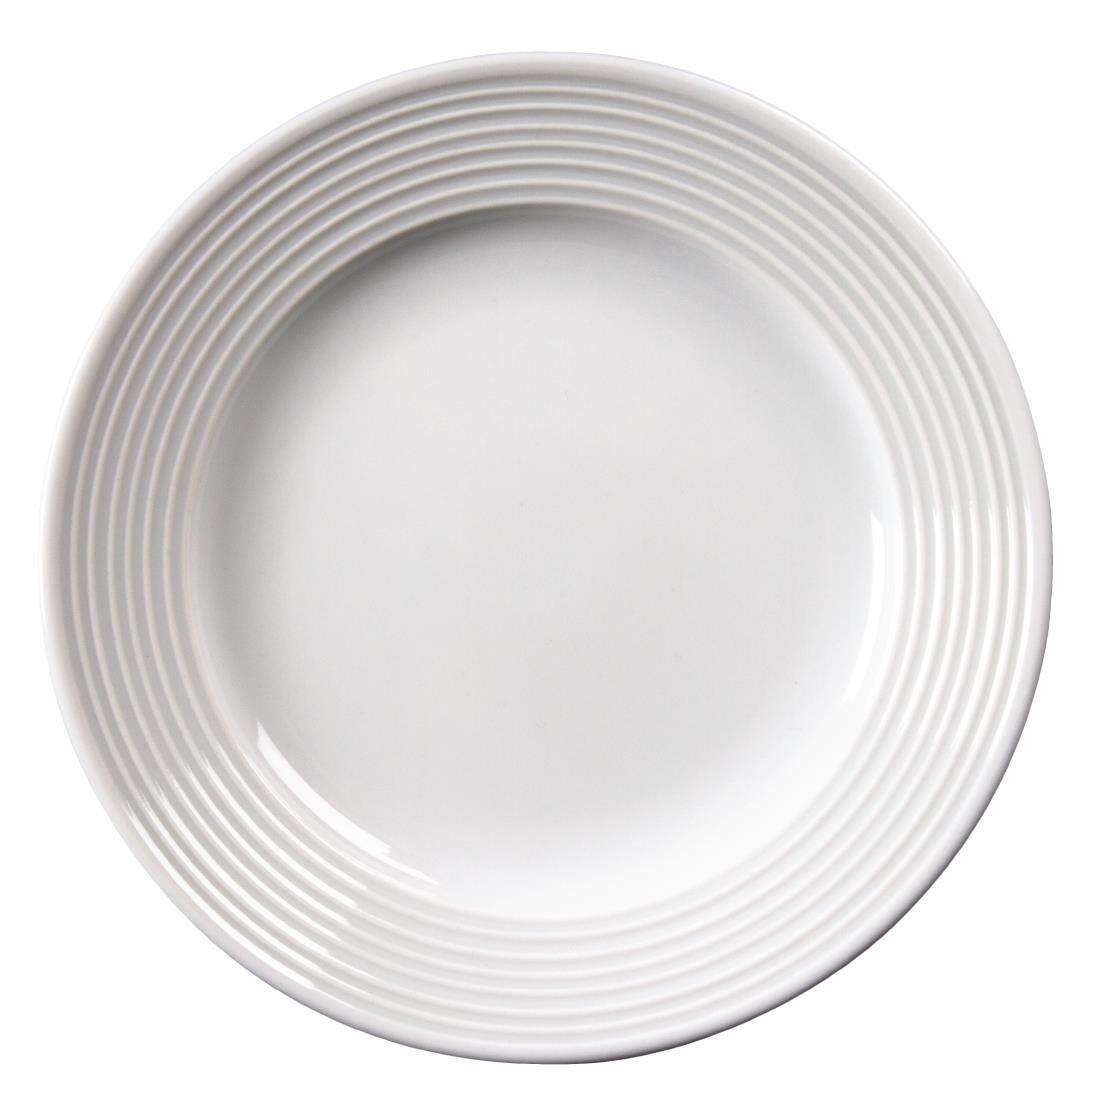 Olympia Linear Wide Rimmed Plates 150mm (Pack of 12) - U089  - 3